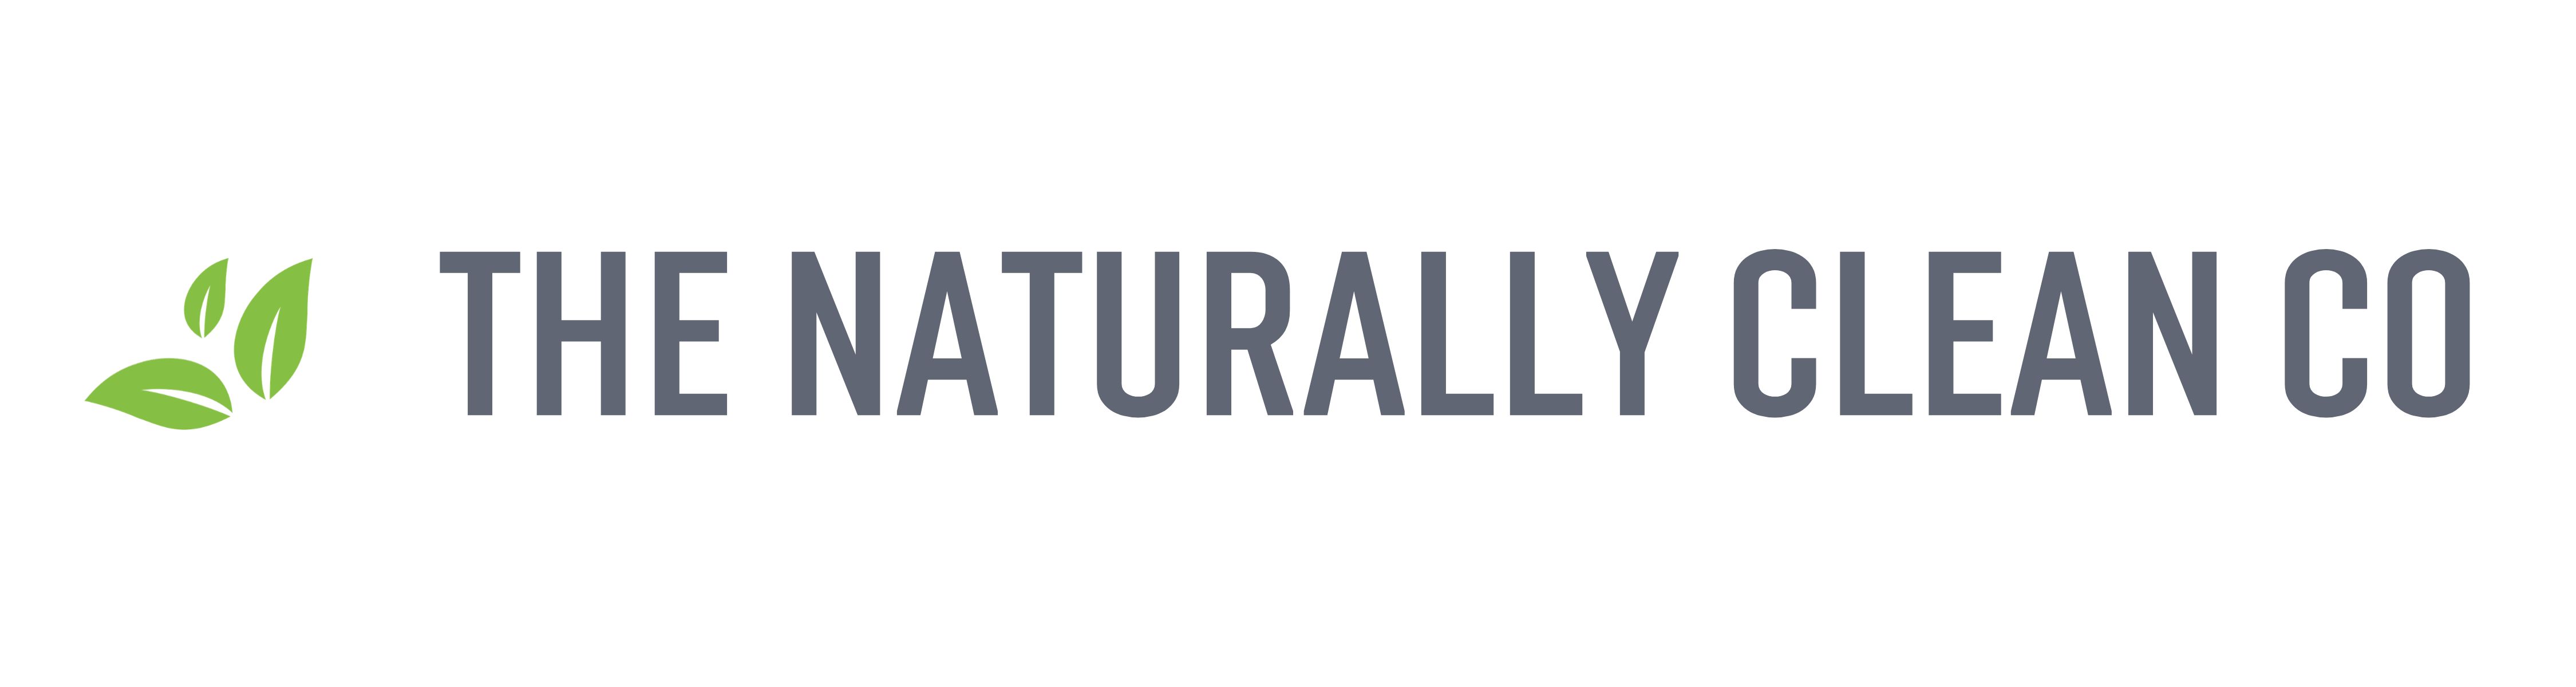 The Naturally Clean Co Brisbane